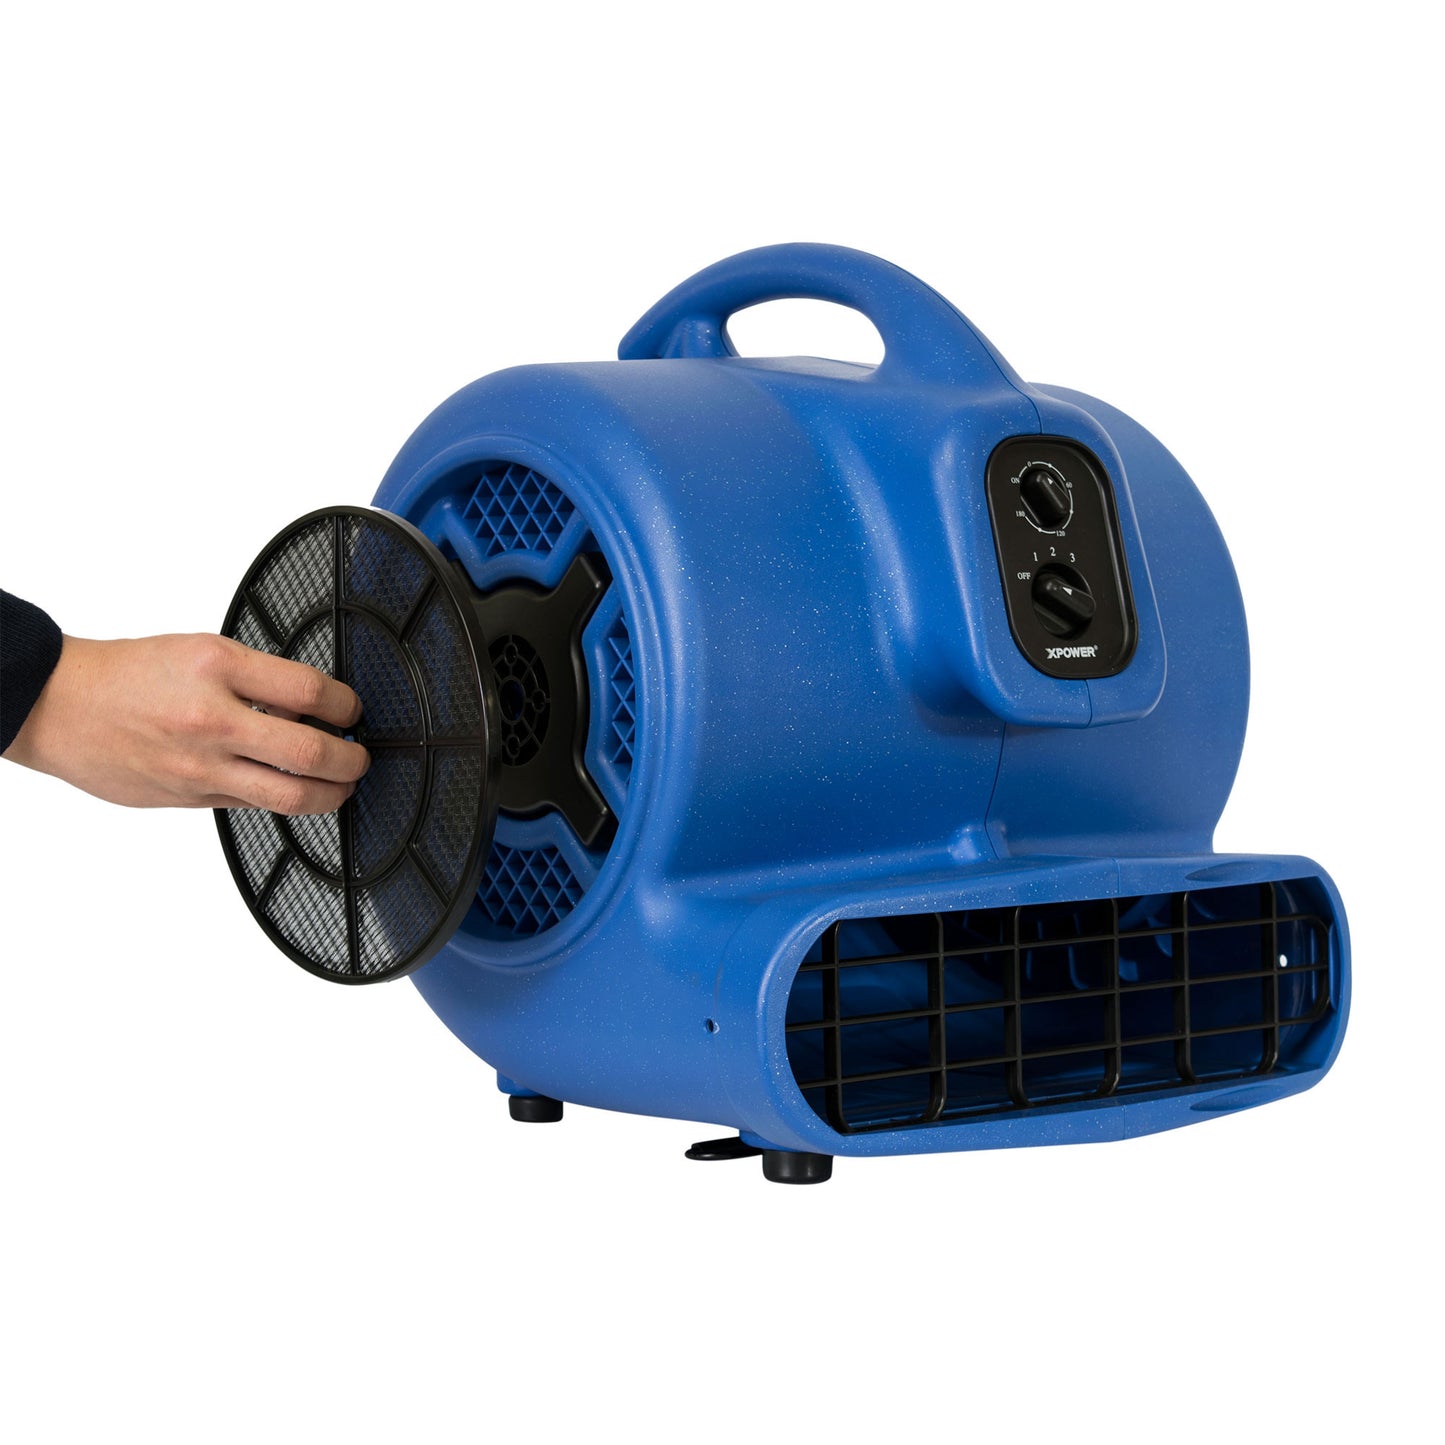 X-800TF Professional Grooming Cage Dryer